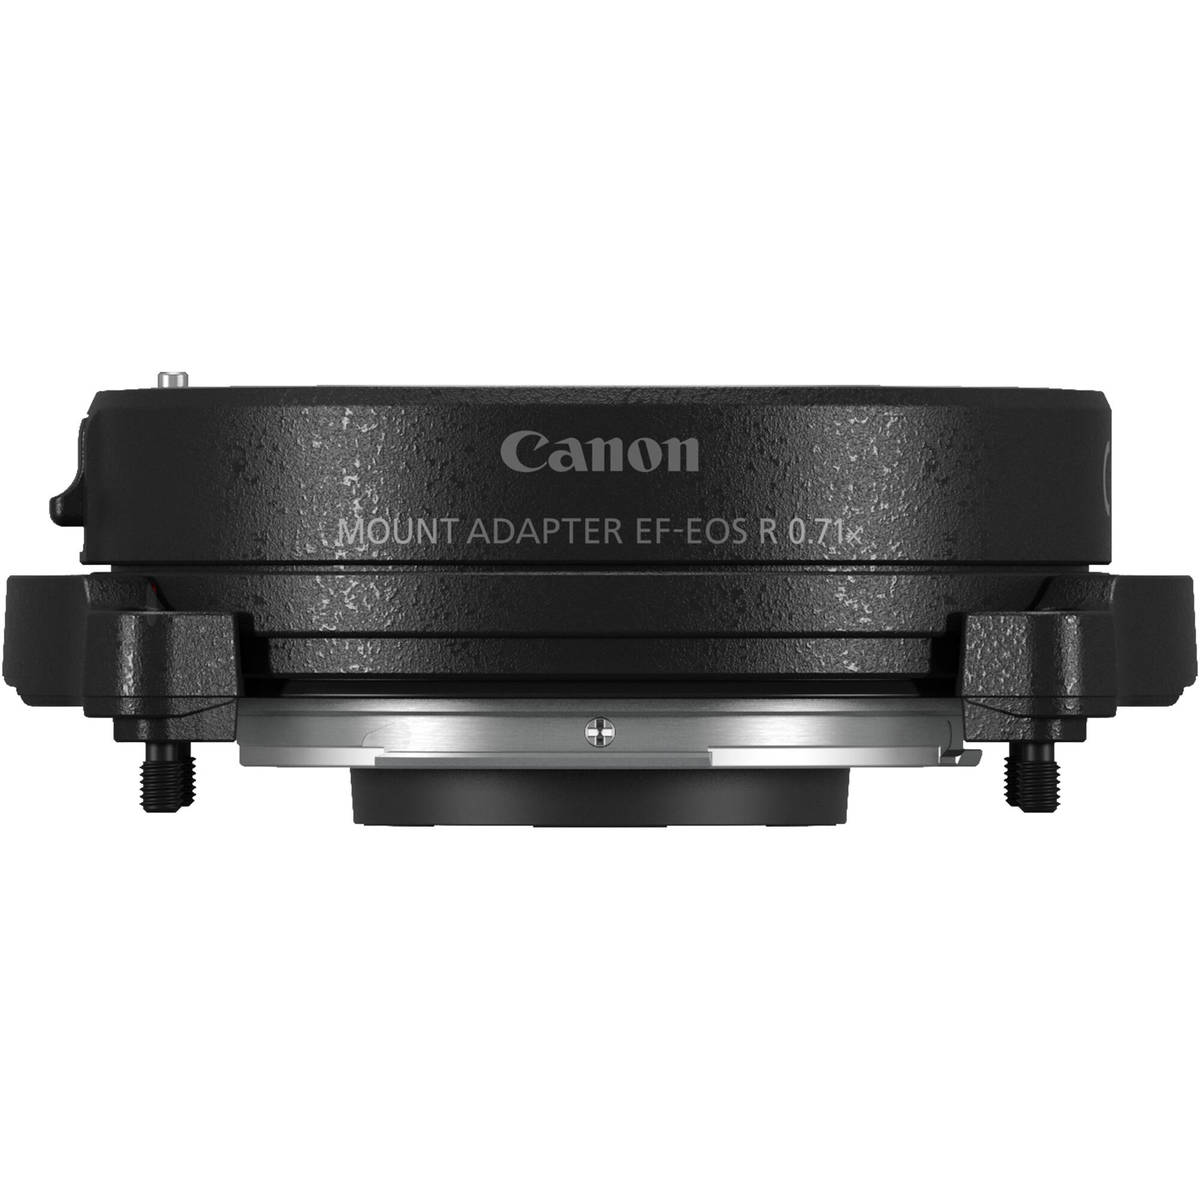 2. Canon Mount Adapter EF-EOS R 0.71x